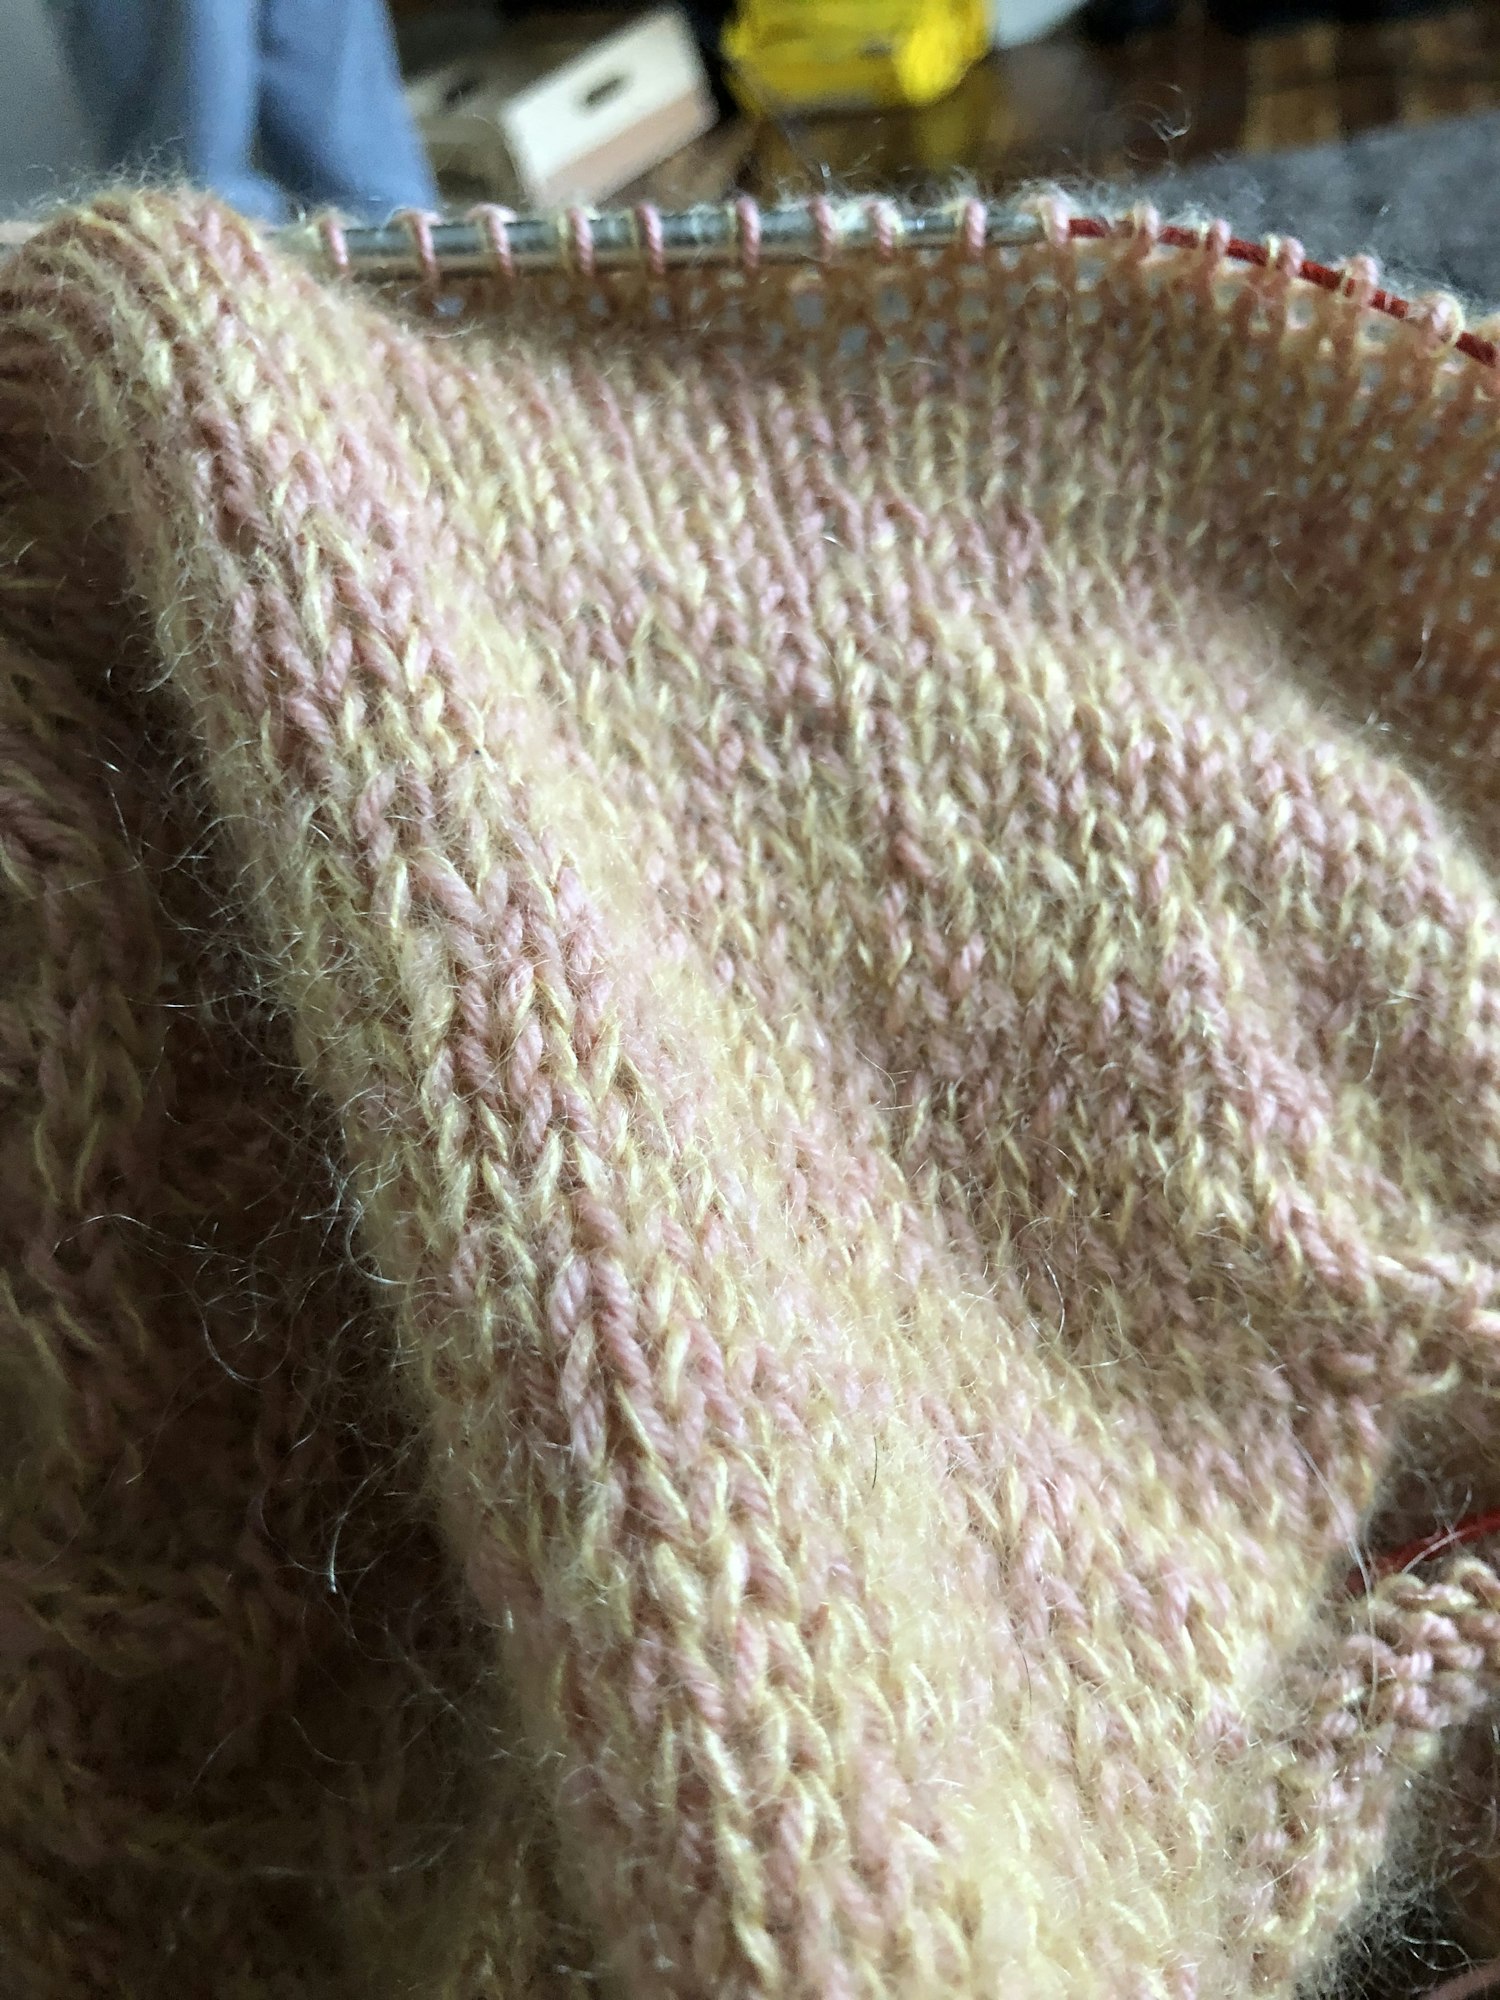 Close up photo of the knit with yellow mohair and pink wool fingering yarn.